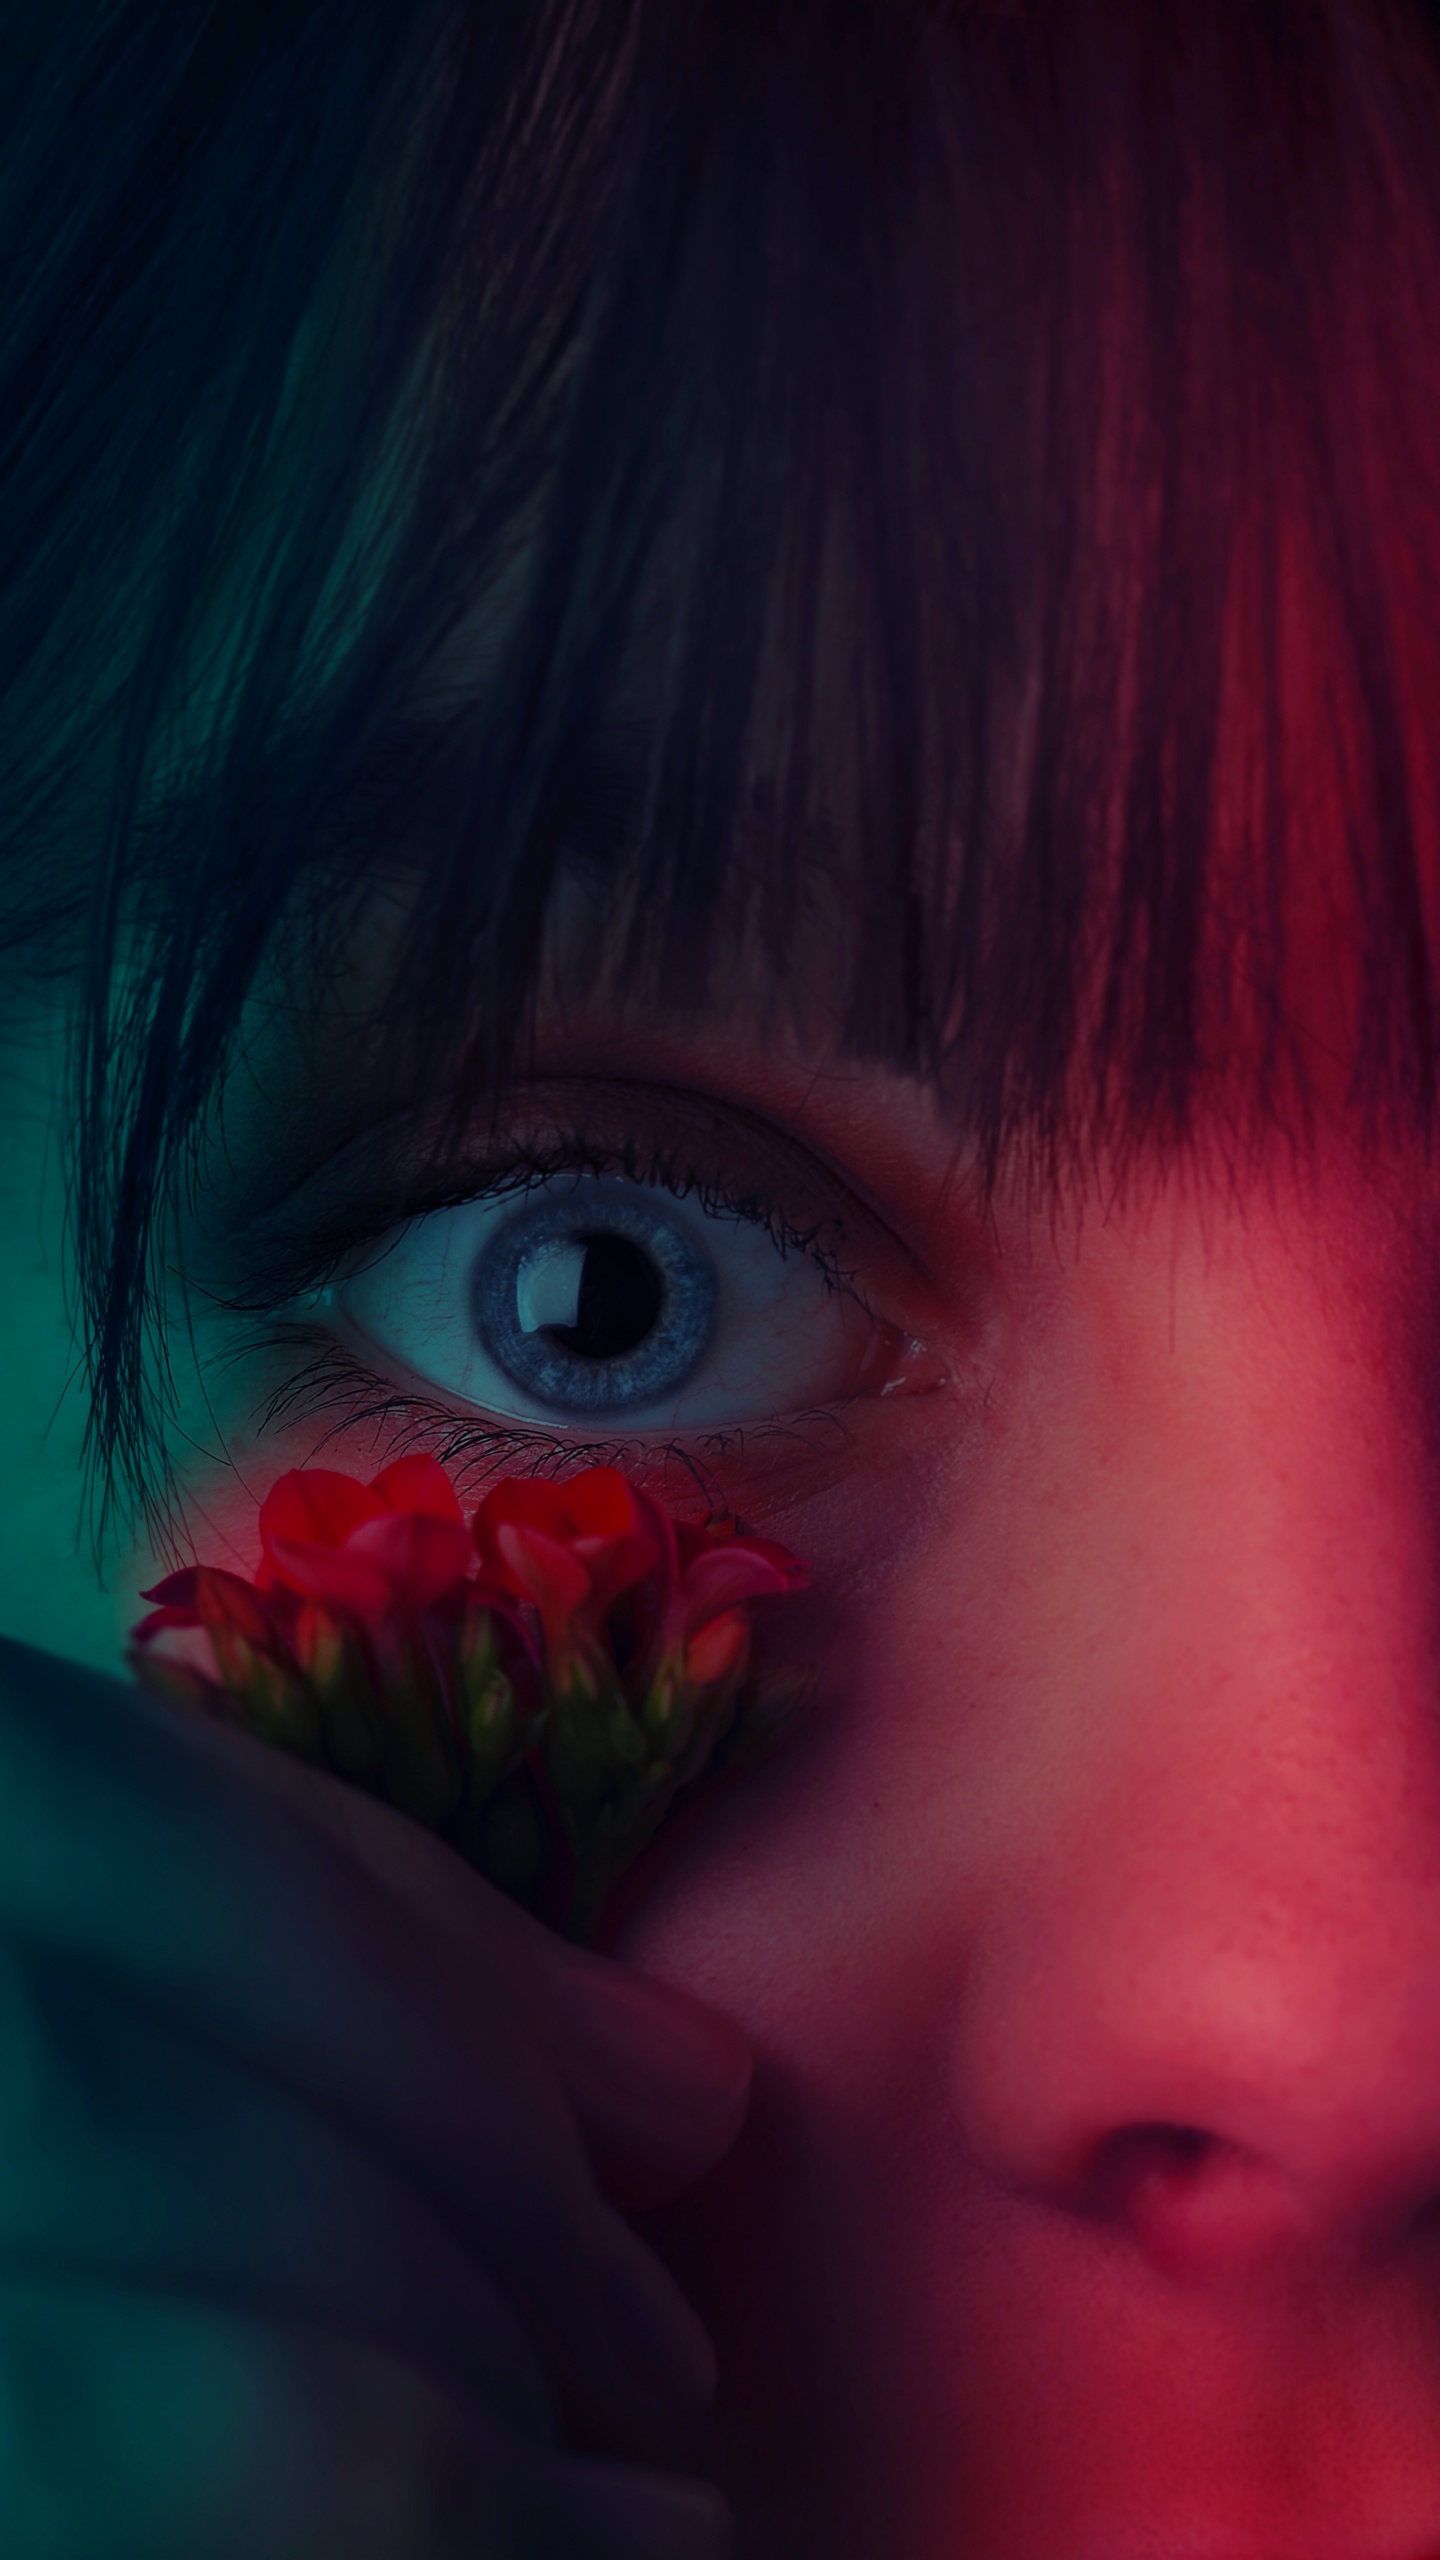 Girl With Red Flower on Her Face. Wallpaper in 1440x2560 Resolution